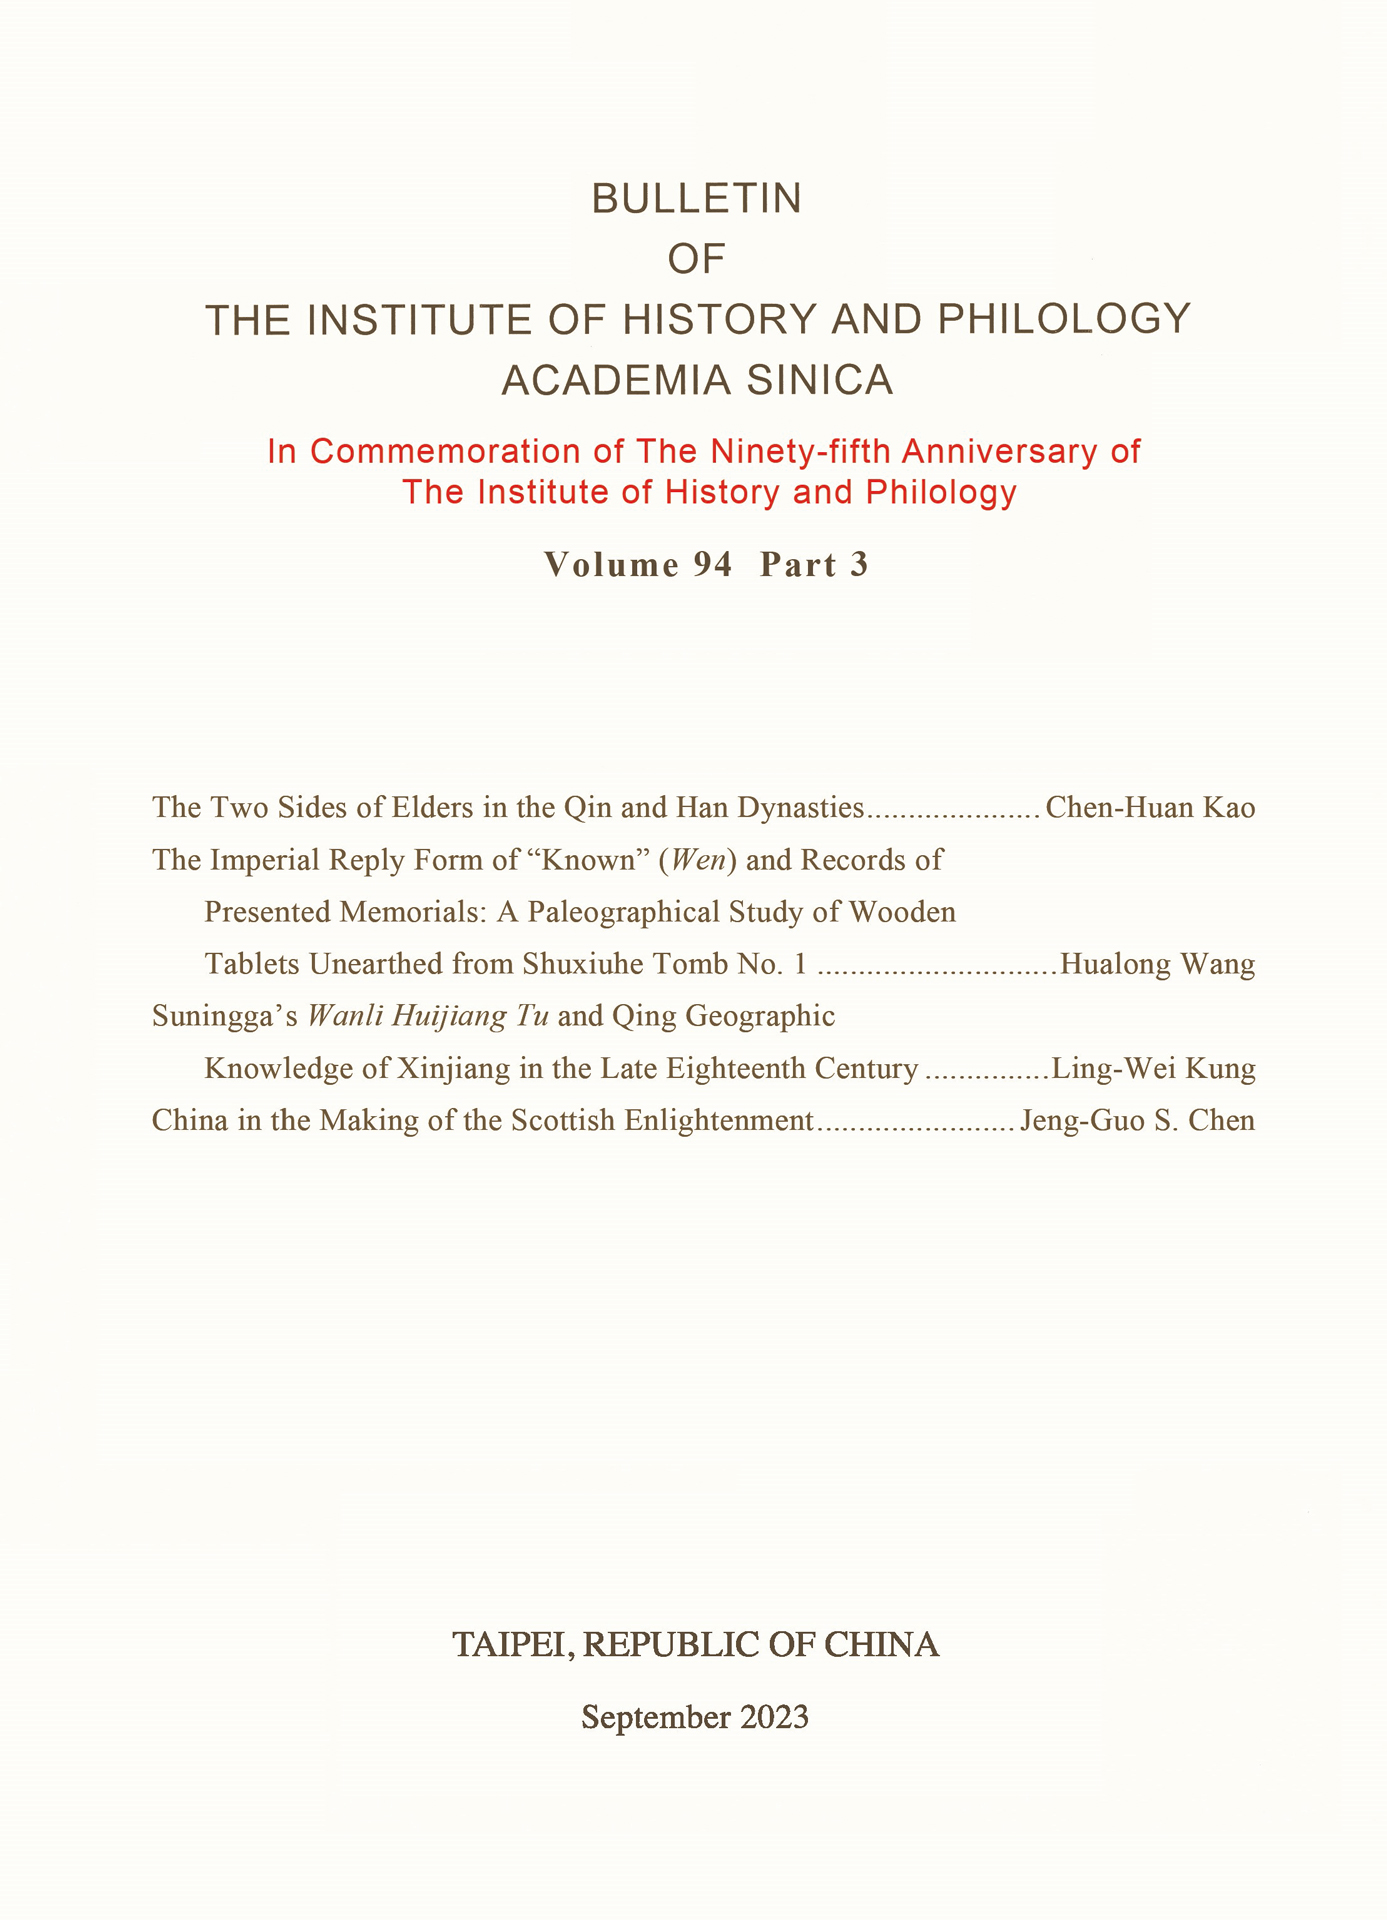 Bulletin of the Institute of History and Philology, Academia Sinica, Volume 94 Part 3 is now available online